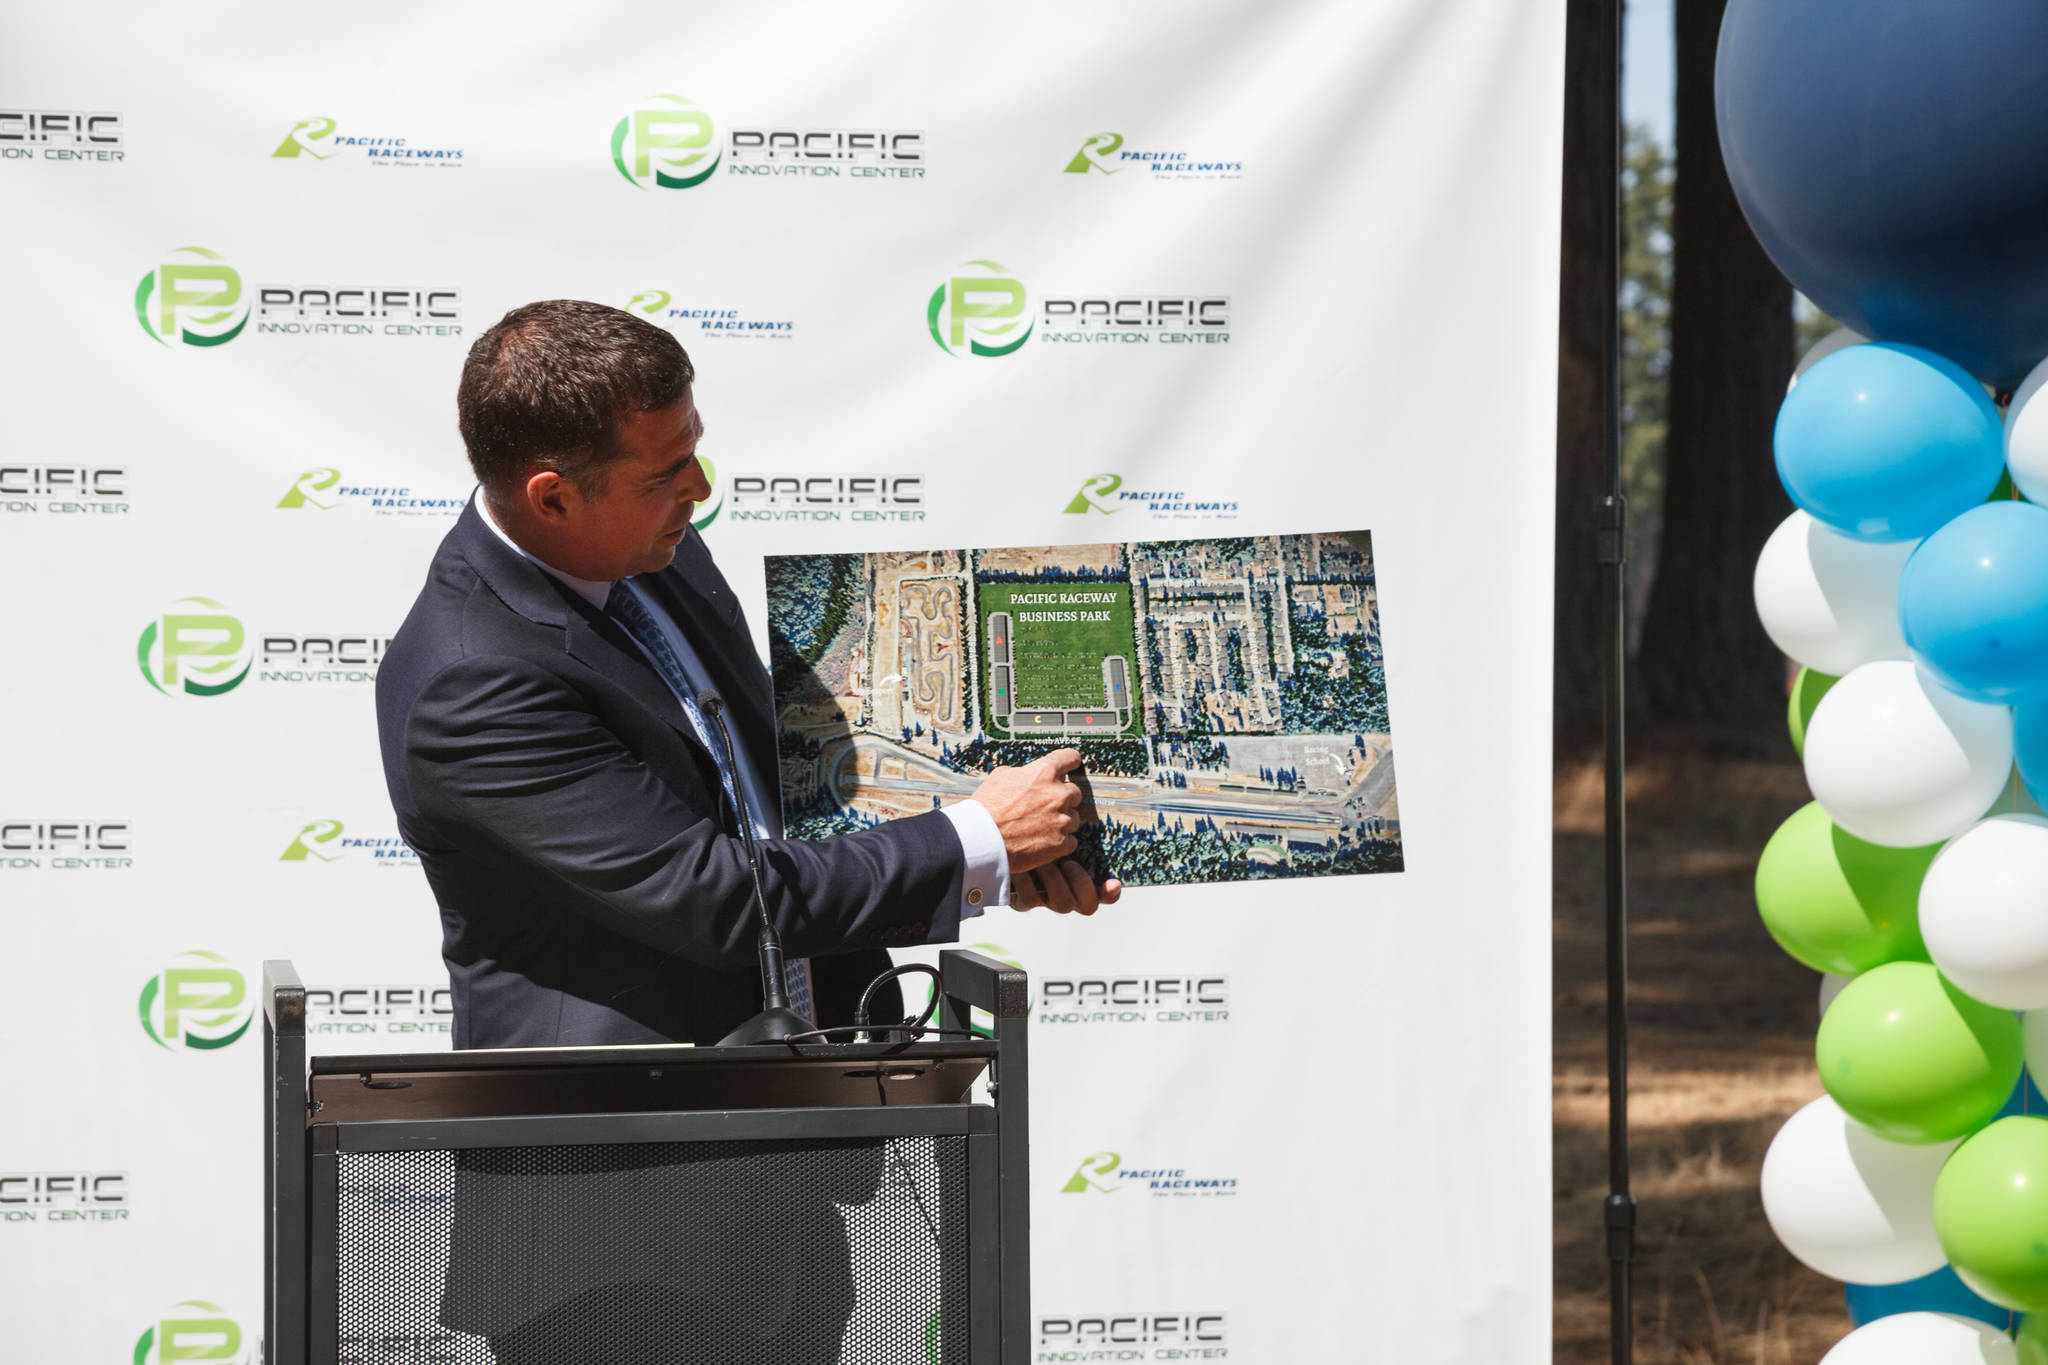 Jason Fiorito shows a rendering of the new buildings during Pacific Raceways groundbreaking event on Wednesday, Aug. 18, 2021. Photo by Henry Stewart-Wood/Sound Publishing